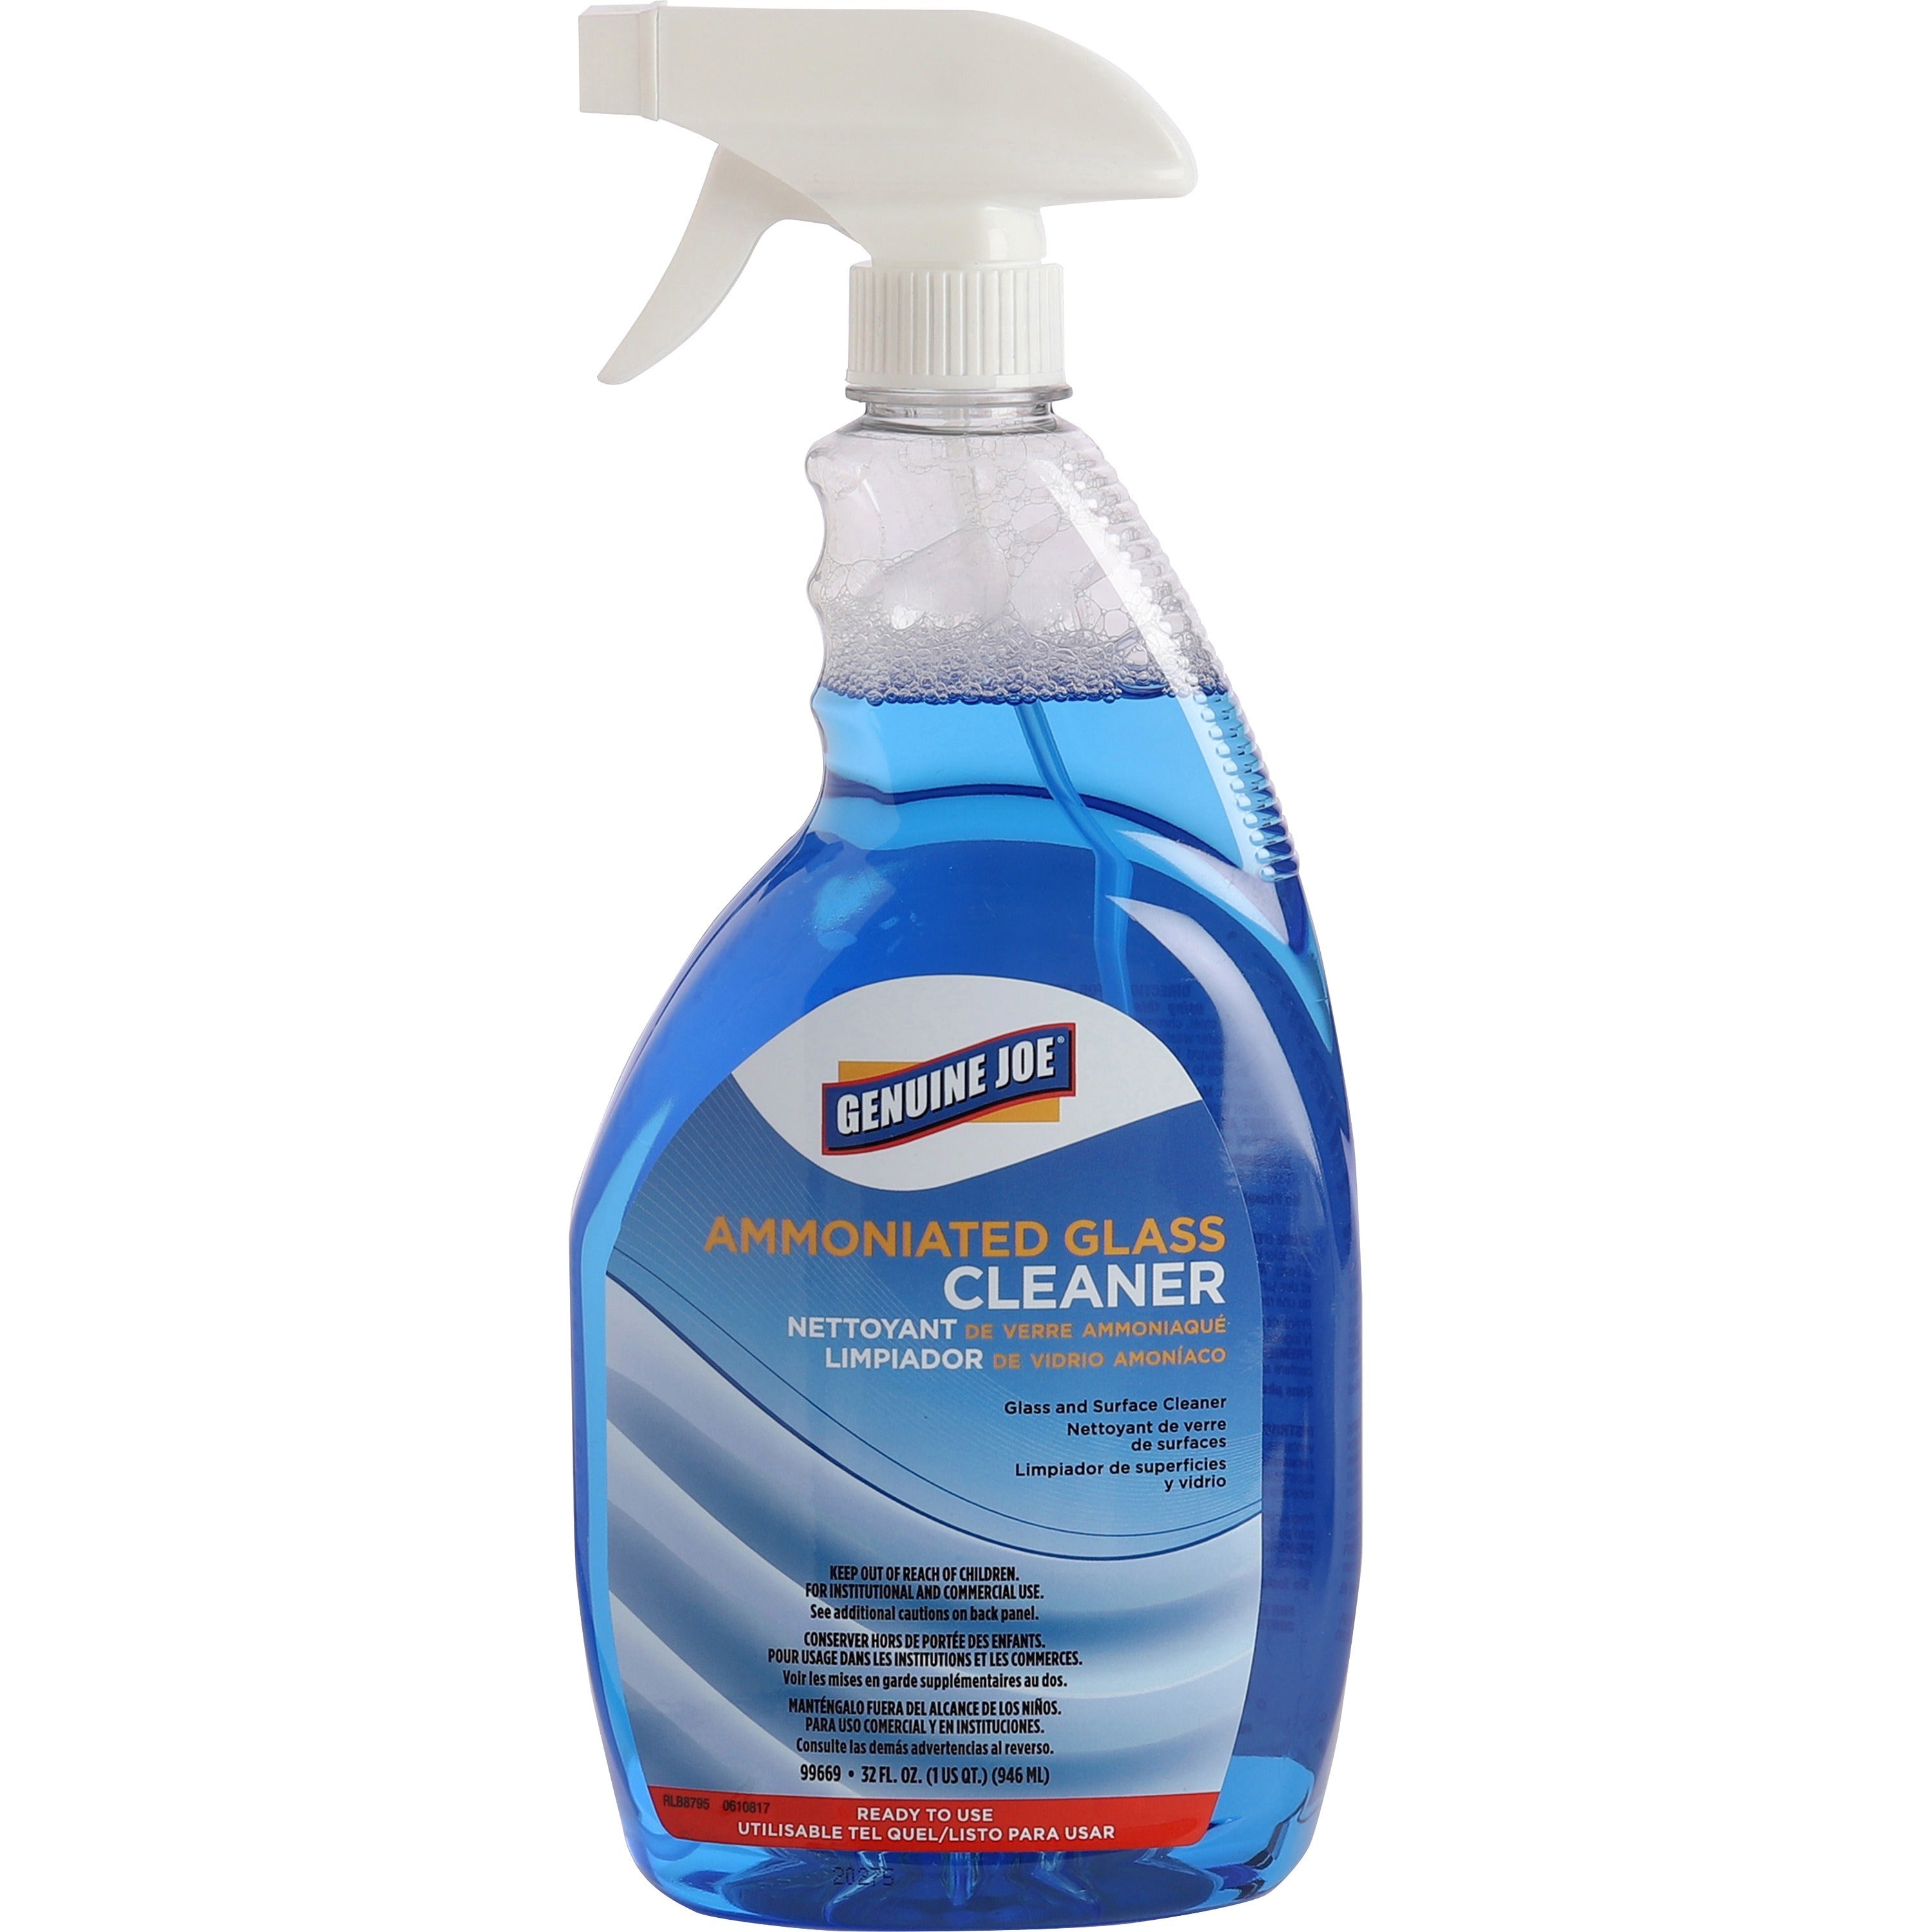 Genuine Joe Ammoniated Glass Cleaner - For Hard Surface - Ready-To-Use - 32 fl oz (1 quart) - 1 Each - Lint-free, Heavy Duty, Easy to Use - Blue - 1